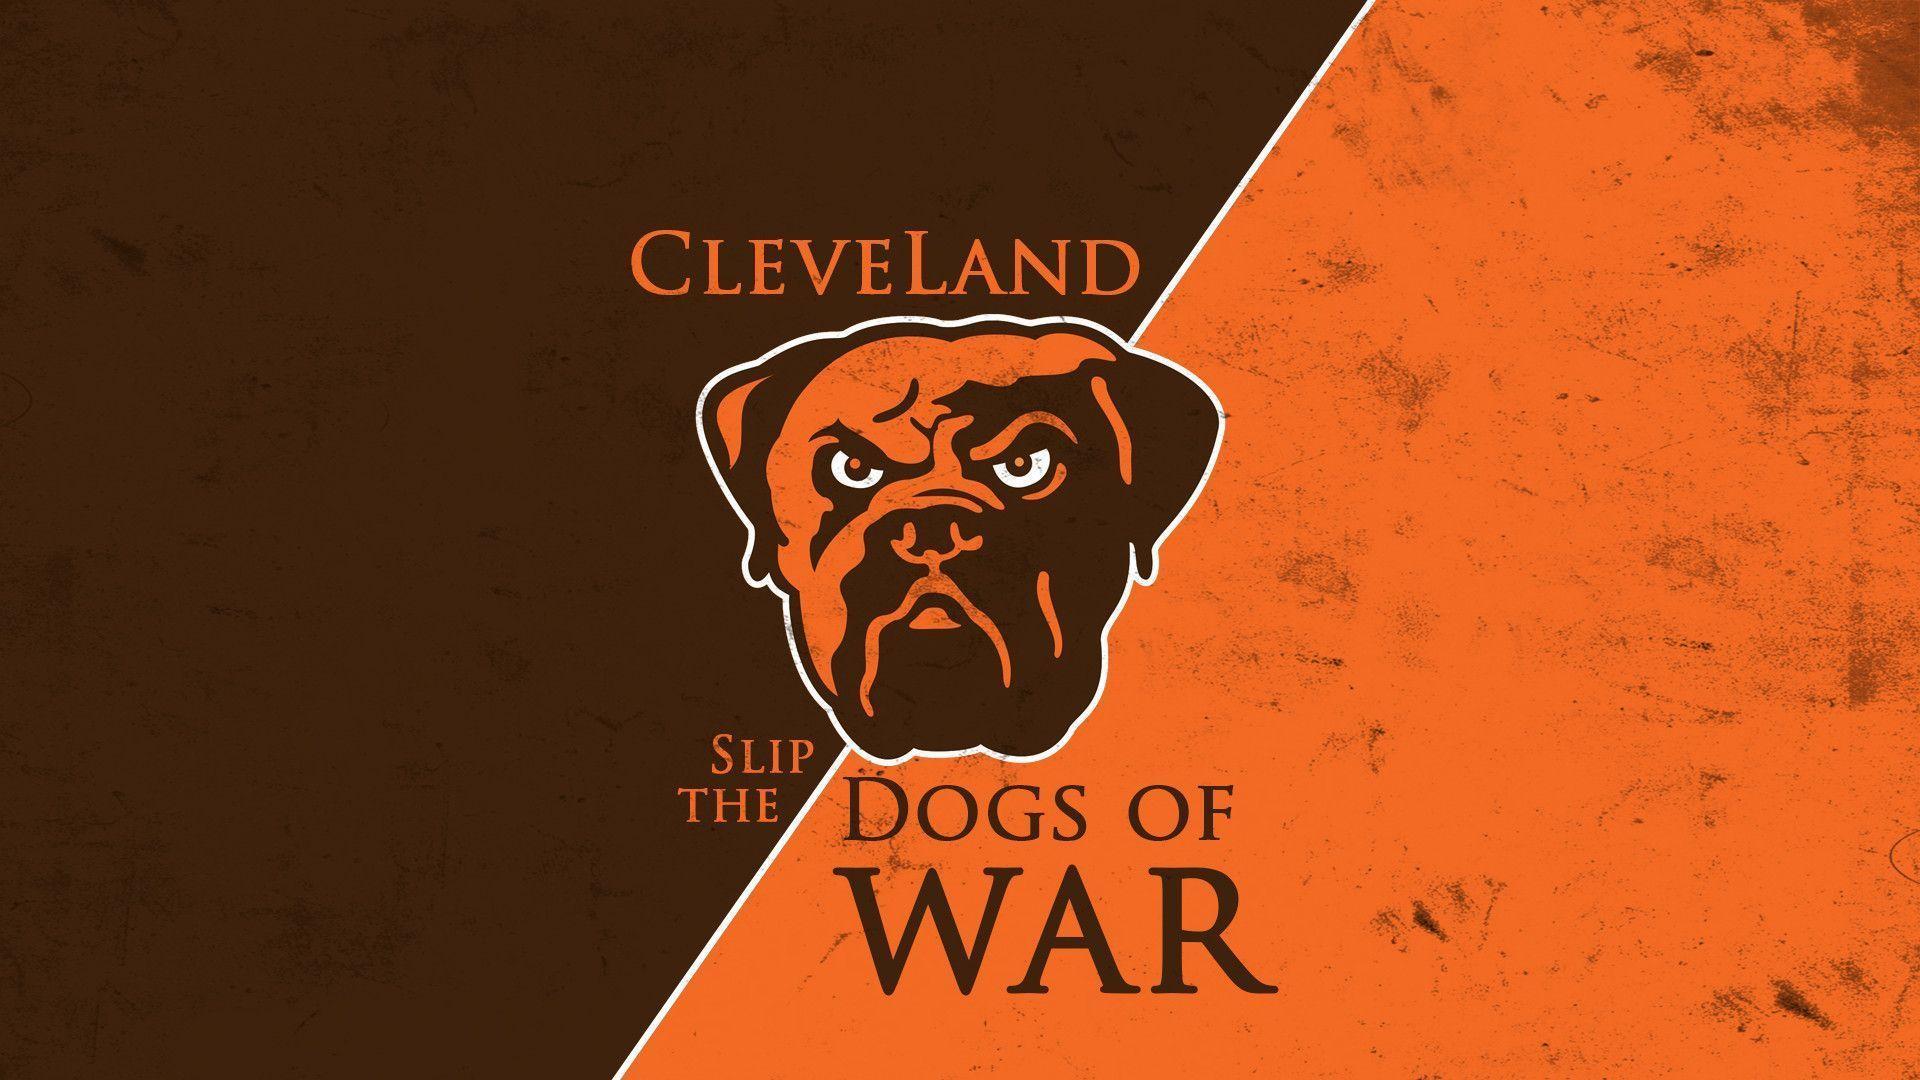 Image For > Cleveland Browns Wallpapers 2014